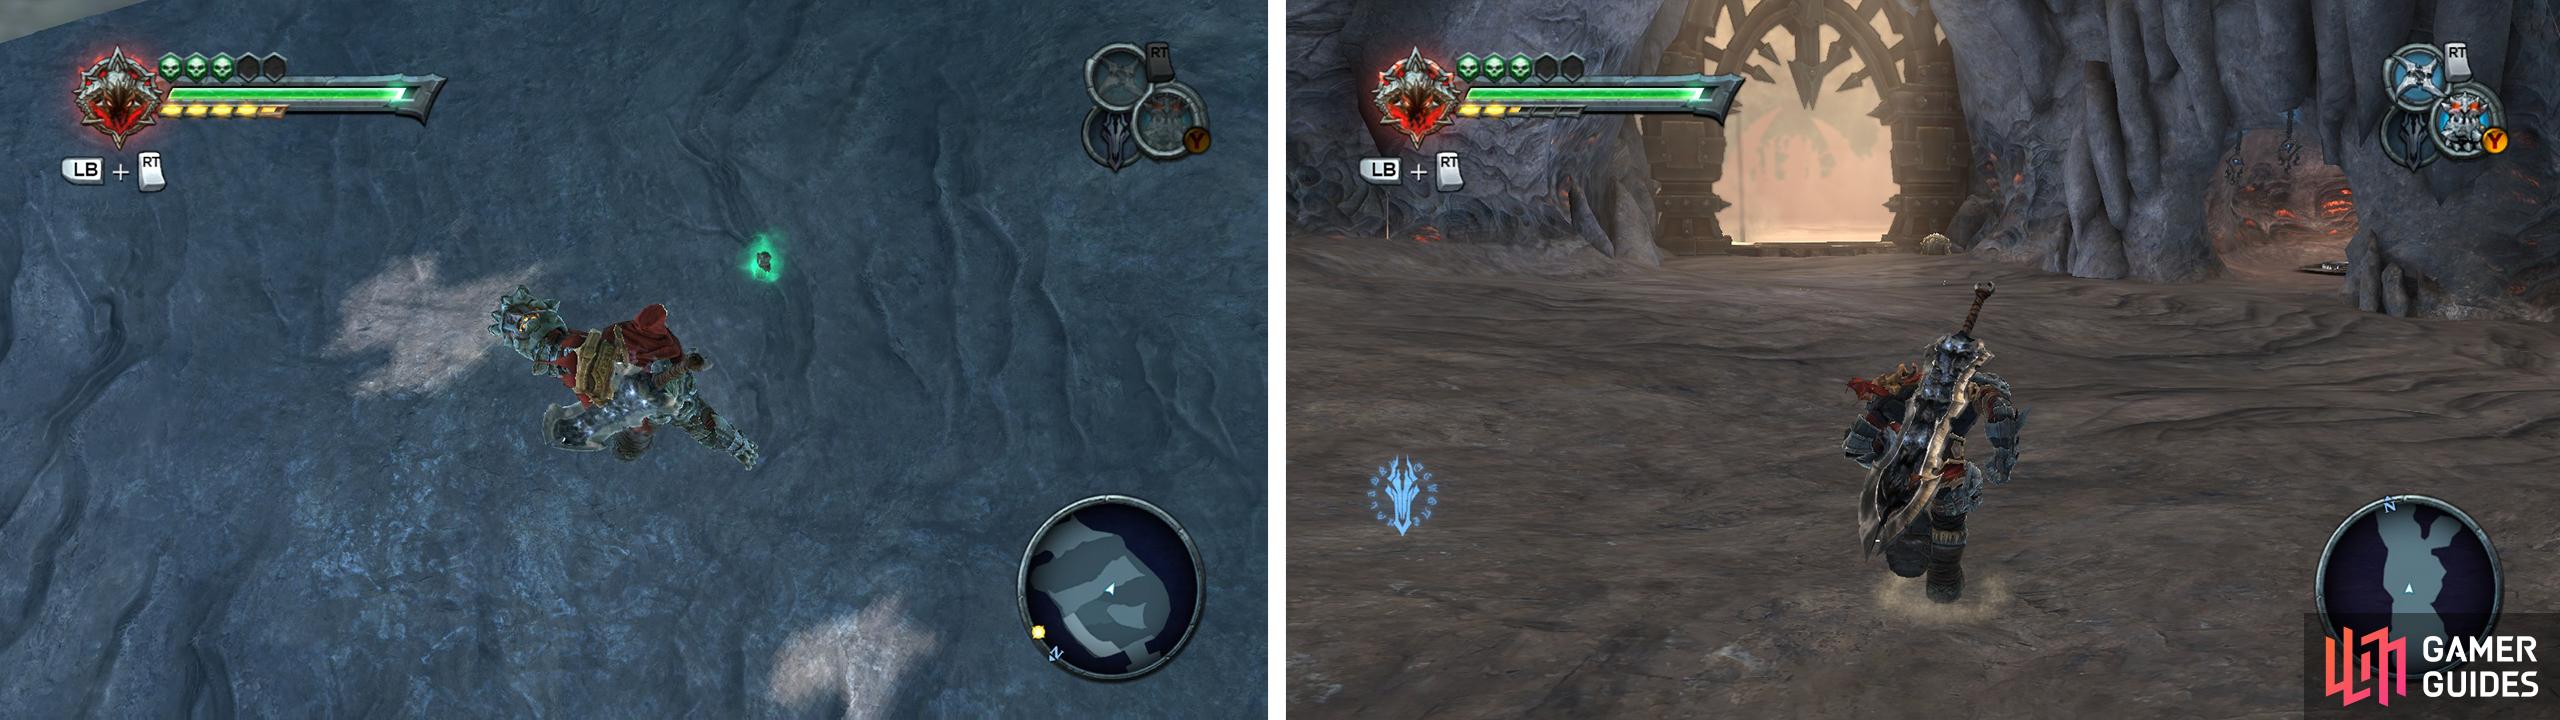 Whilst swimming through the underwater area, look out for an Artefact (left). Use the Vulgrim Location (right) before entering the boss area at th eend of the tunnel.